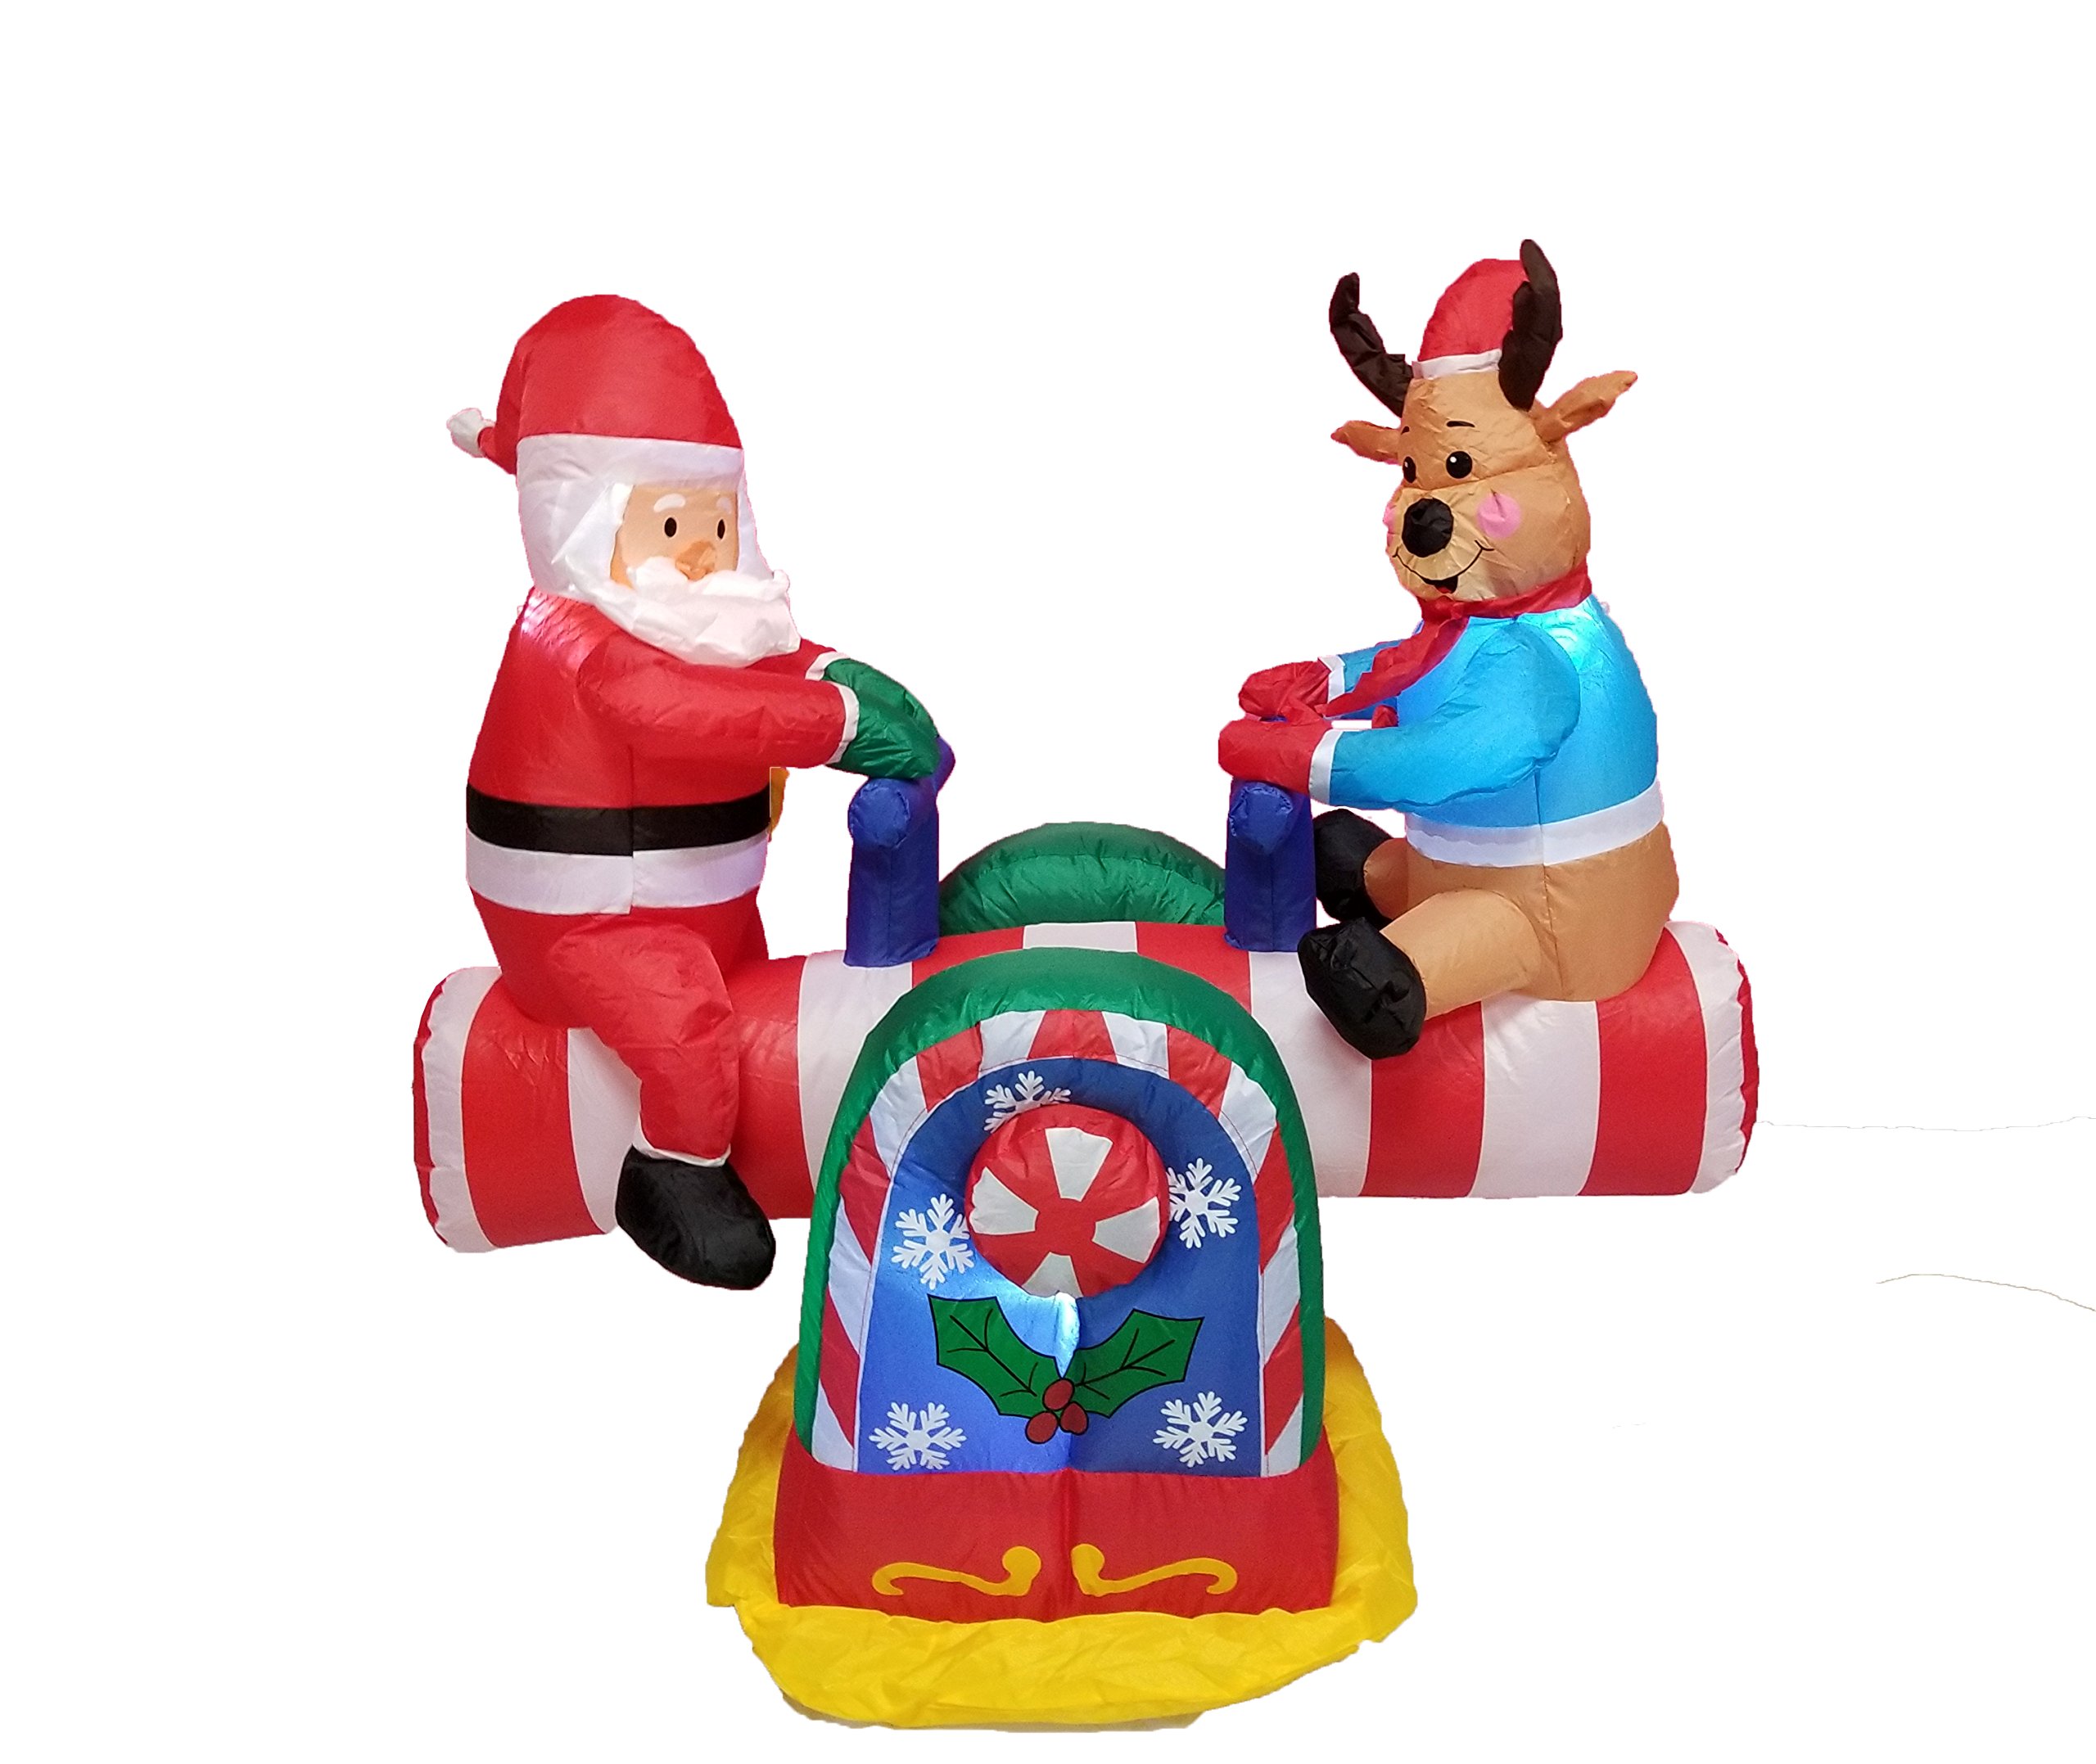 BZB goods 4 Foot Animated christmas Inflatable Santa claus and Reindeer on Teeter Totter Outdoor Yard Decoration Lights Decor Ou